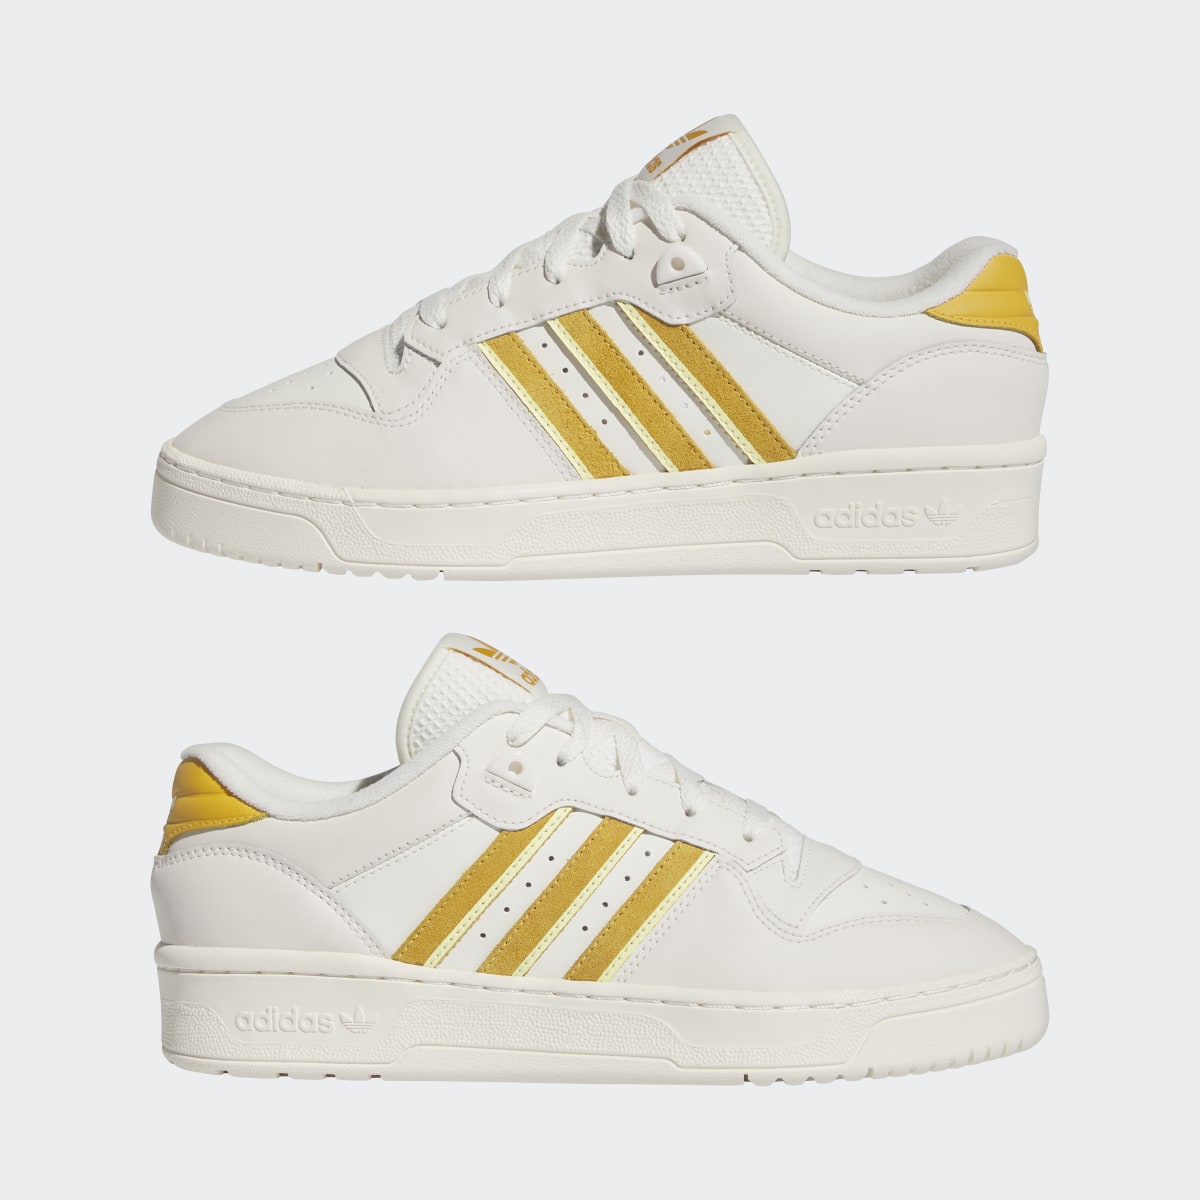 Adidas Rivalry Low Shoes. 8